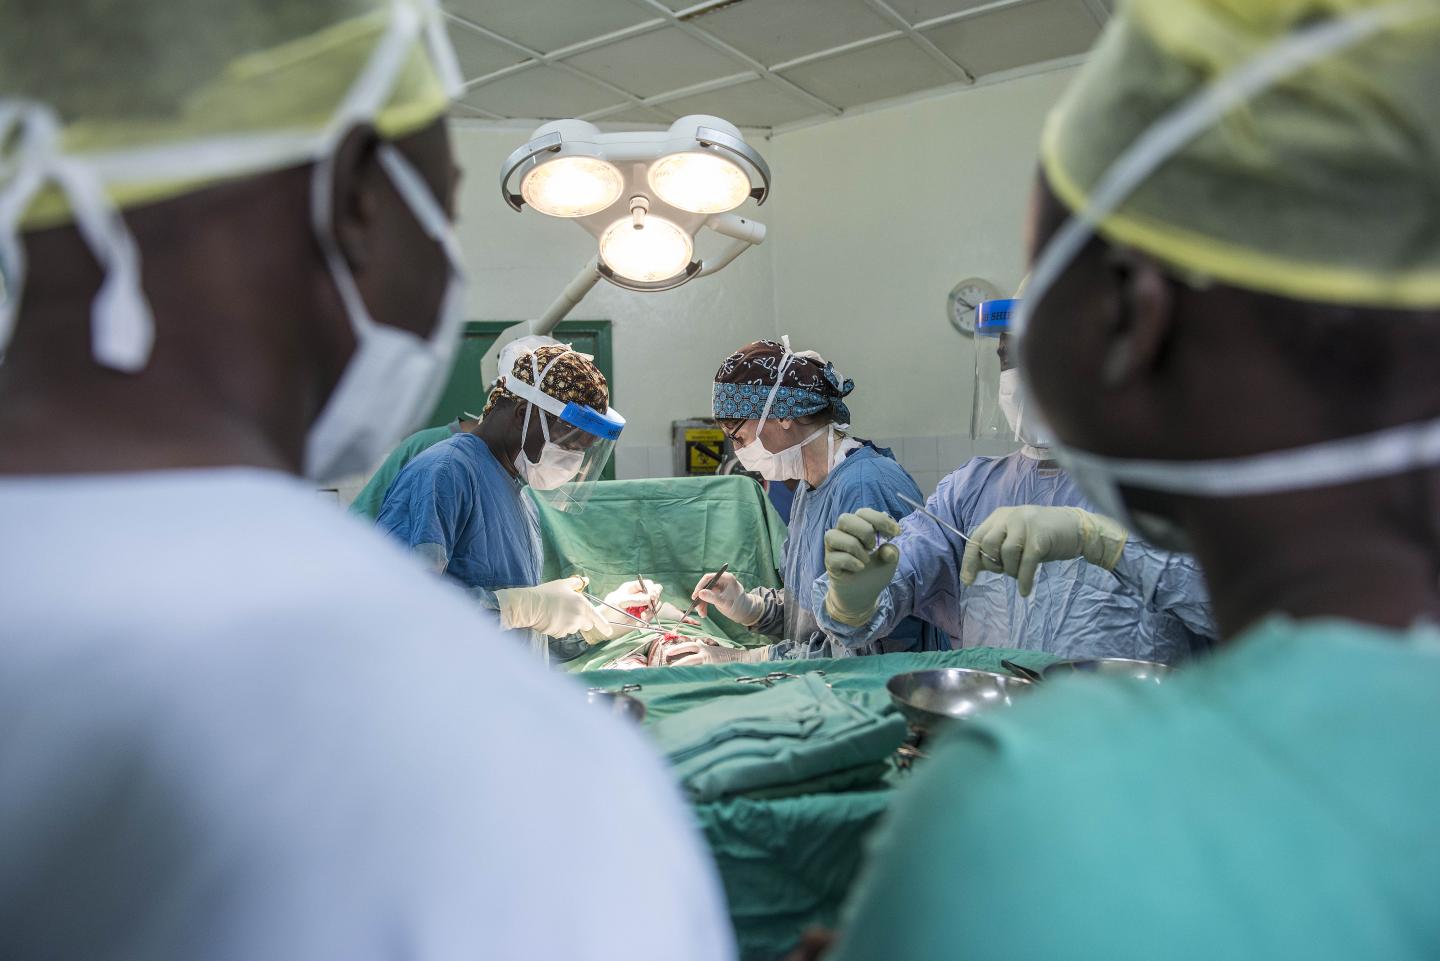 Community medical officers in Sierra Leone training to do life-saving surgeries